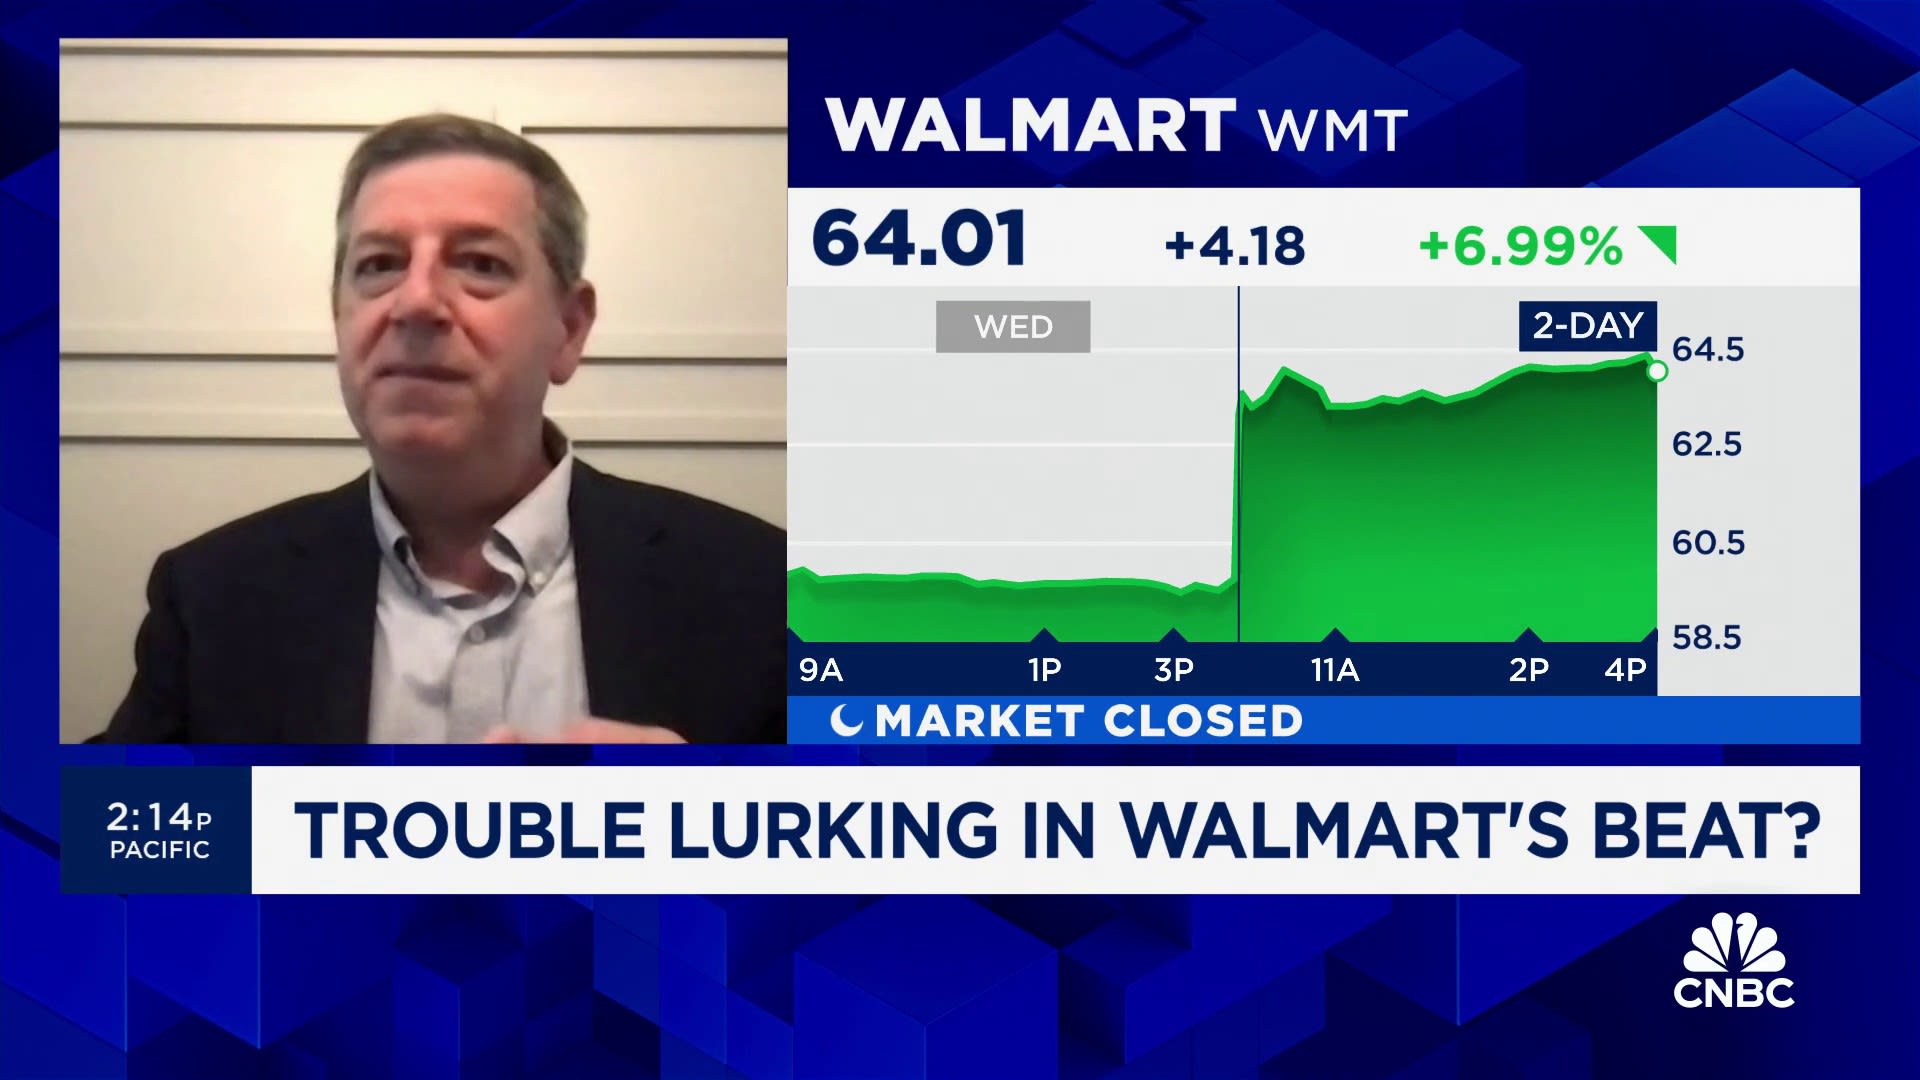 Walmart will have trouble keeping affluent consumers, former Walmart U.S. CEO Bill Simon predicts